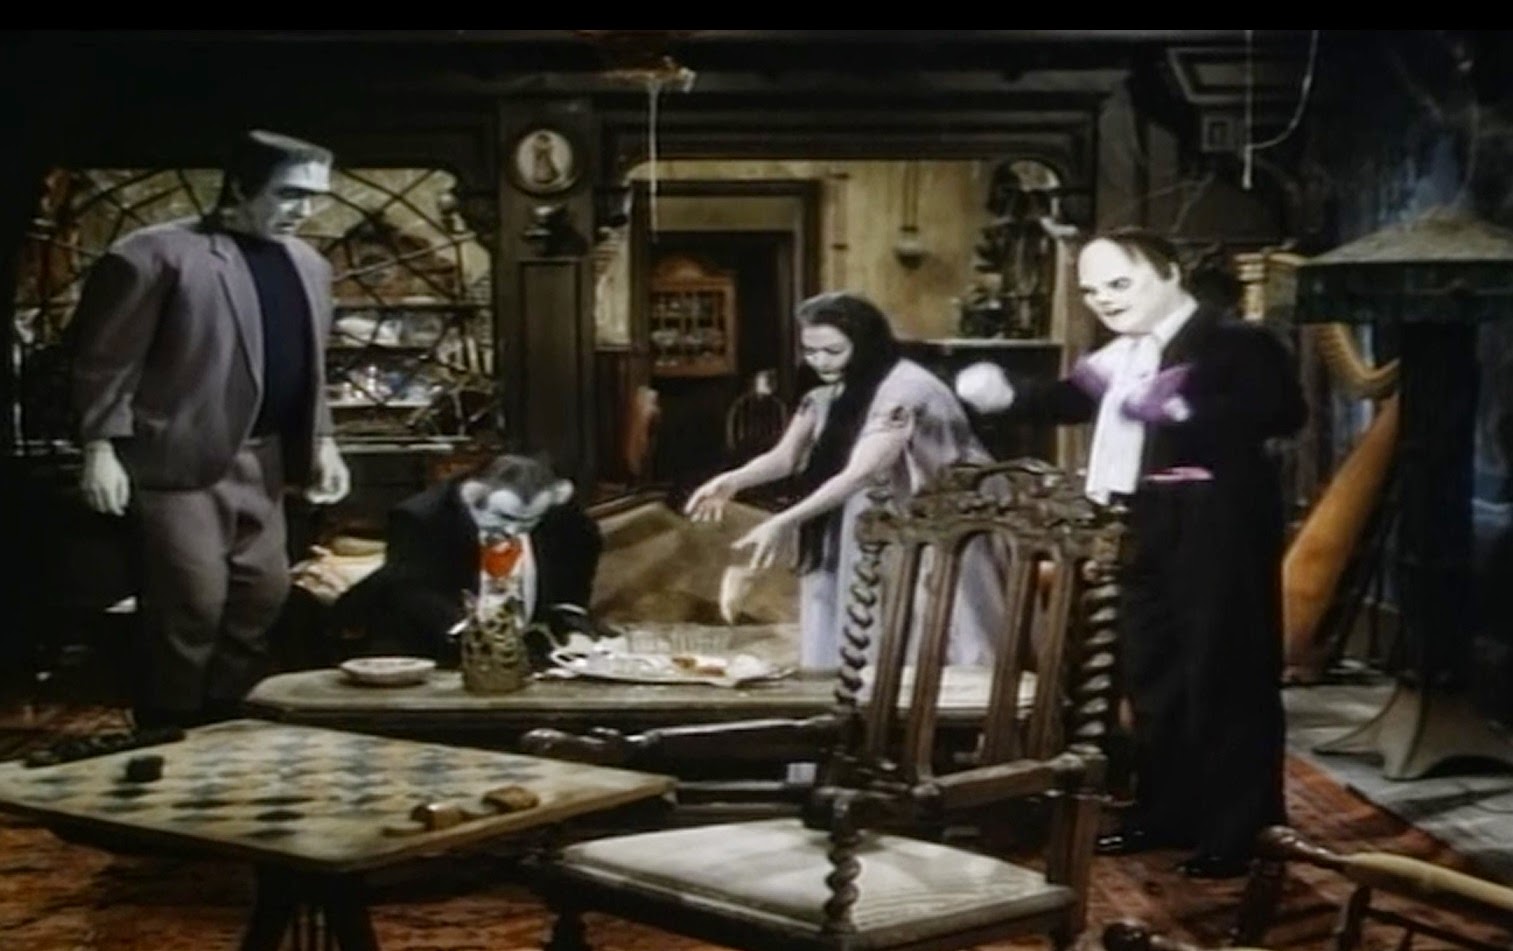 munsters living room in color